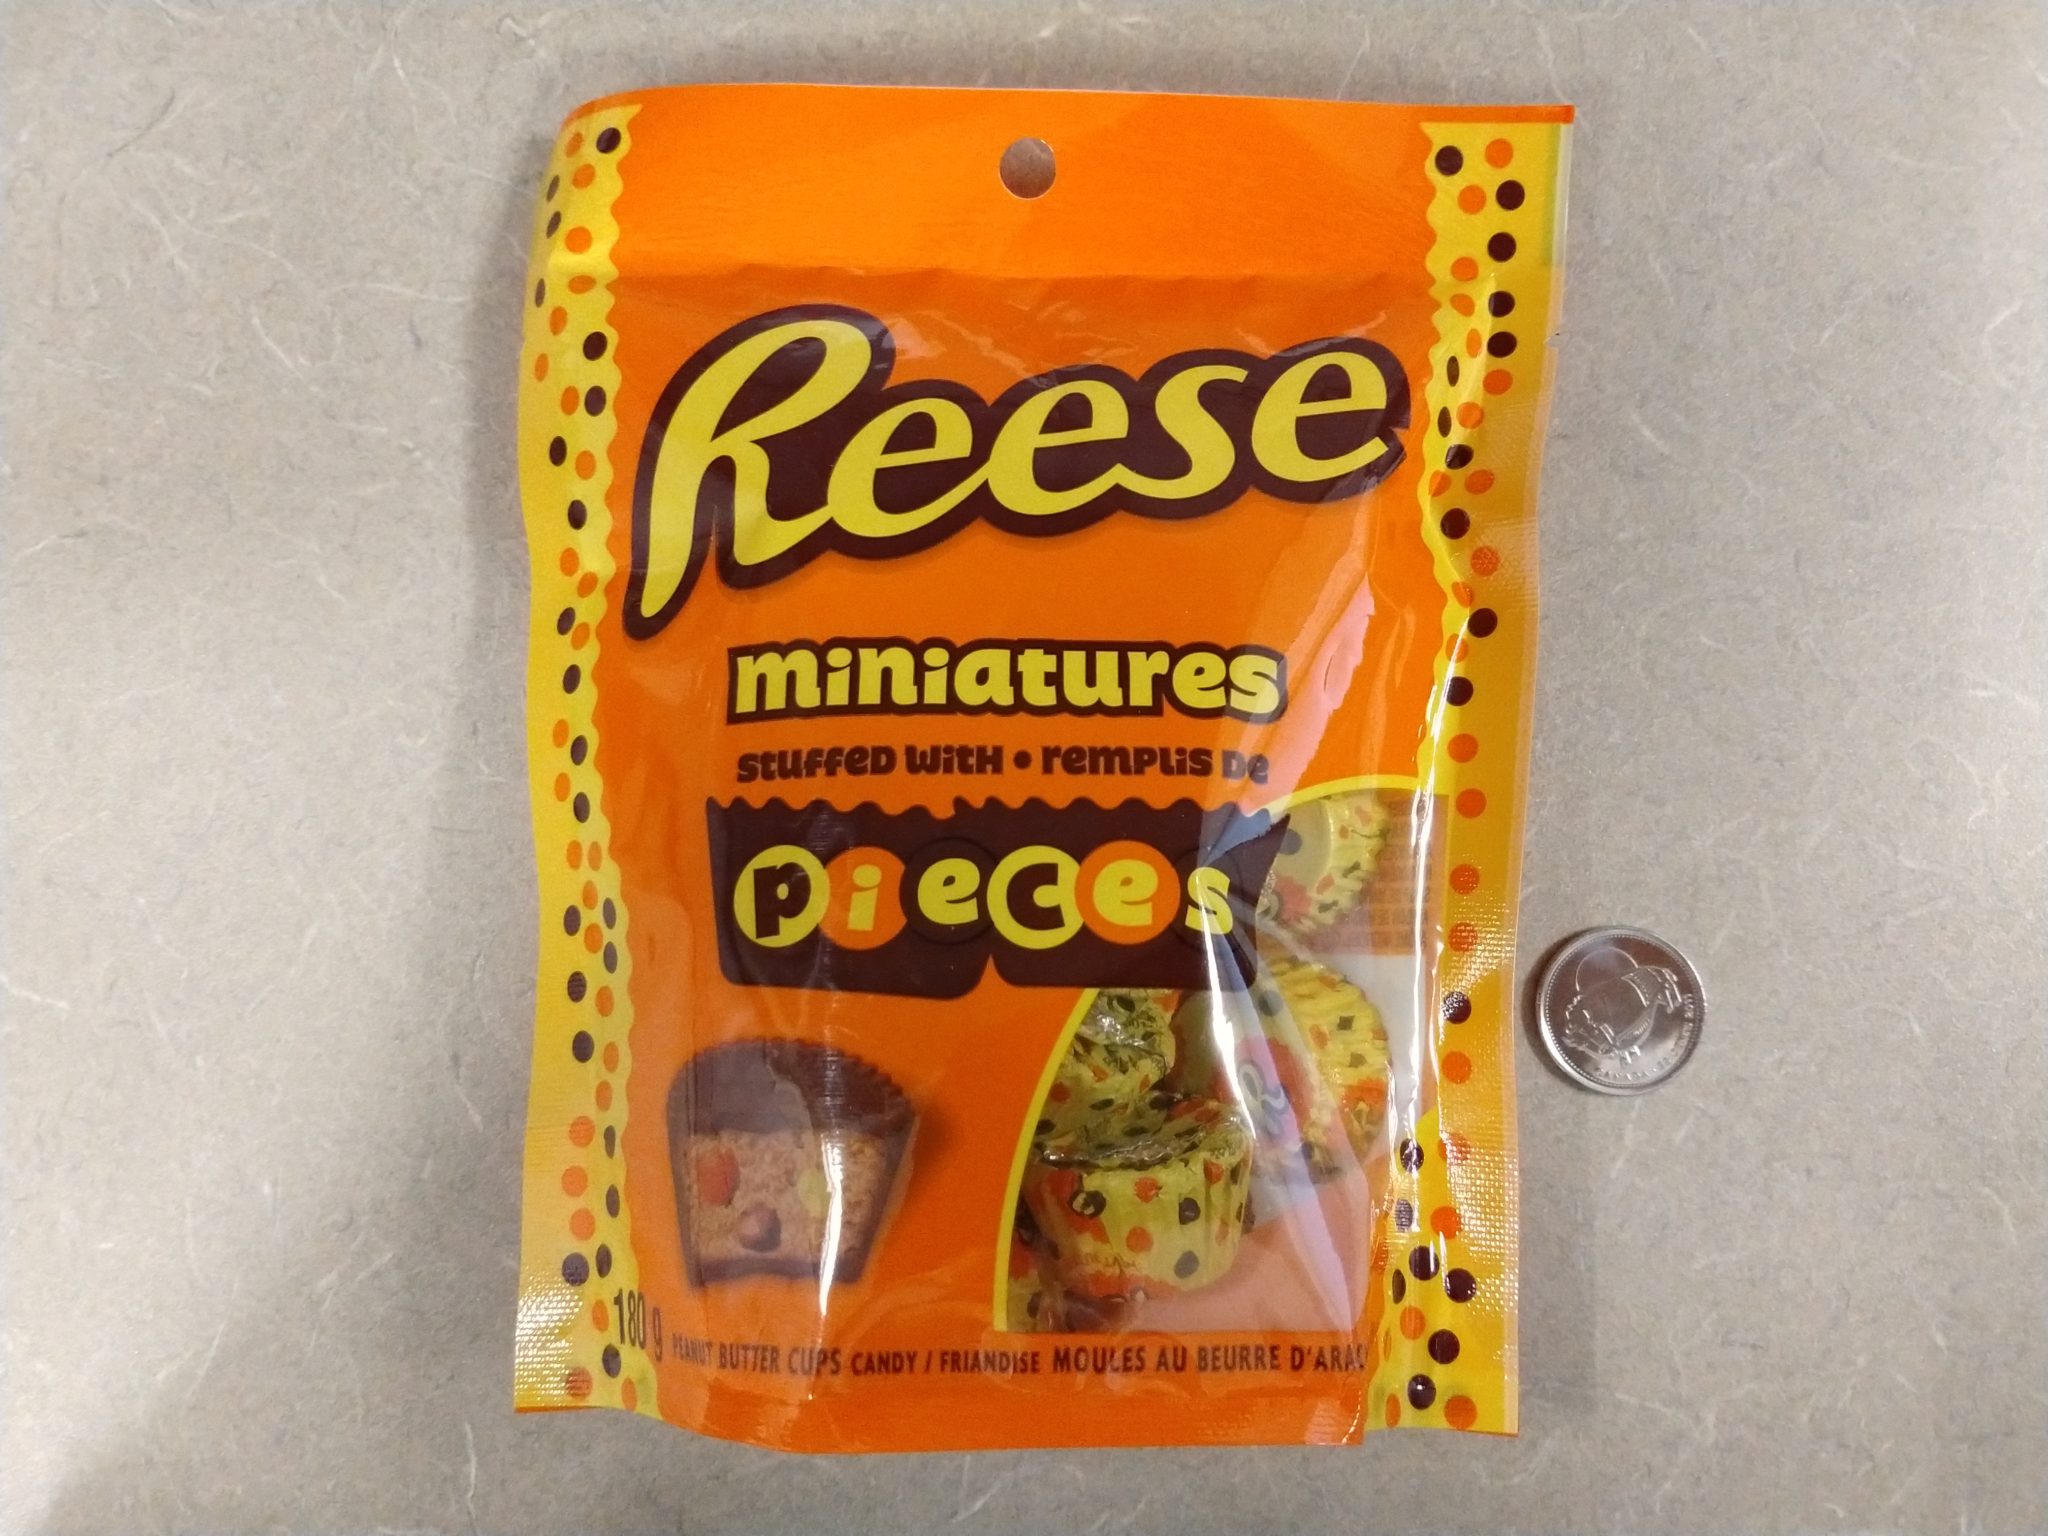 Reese’s Miniatures with Pieces